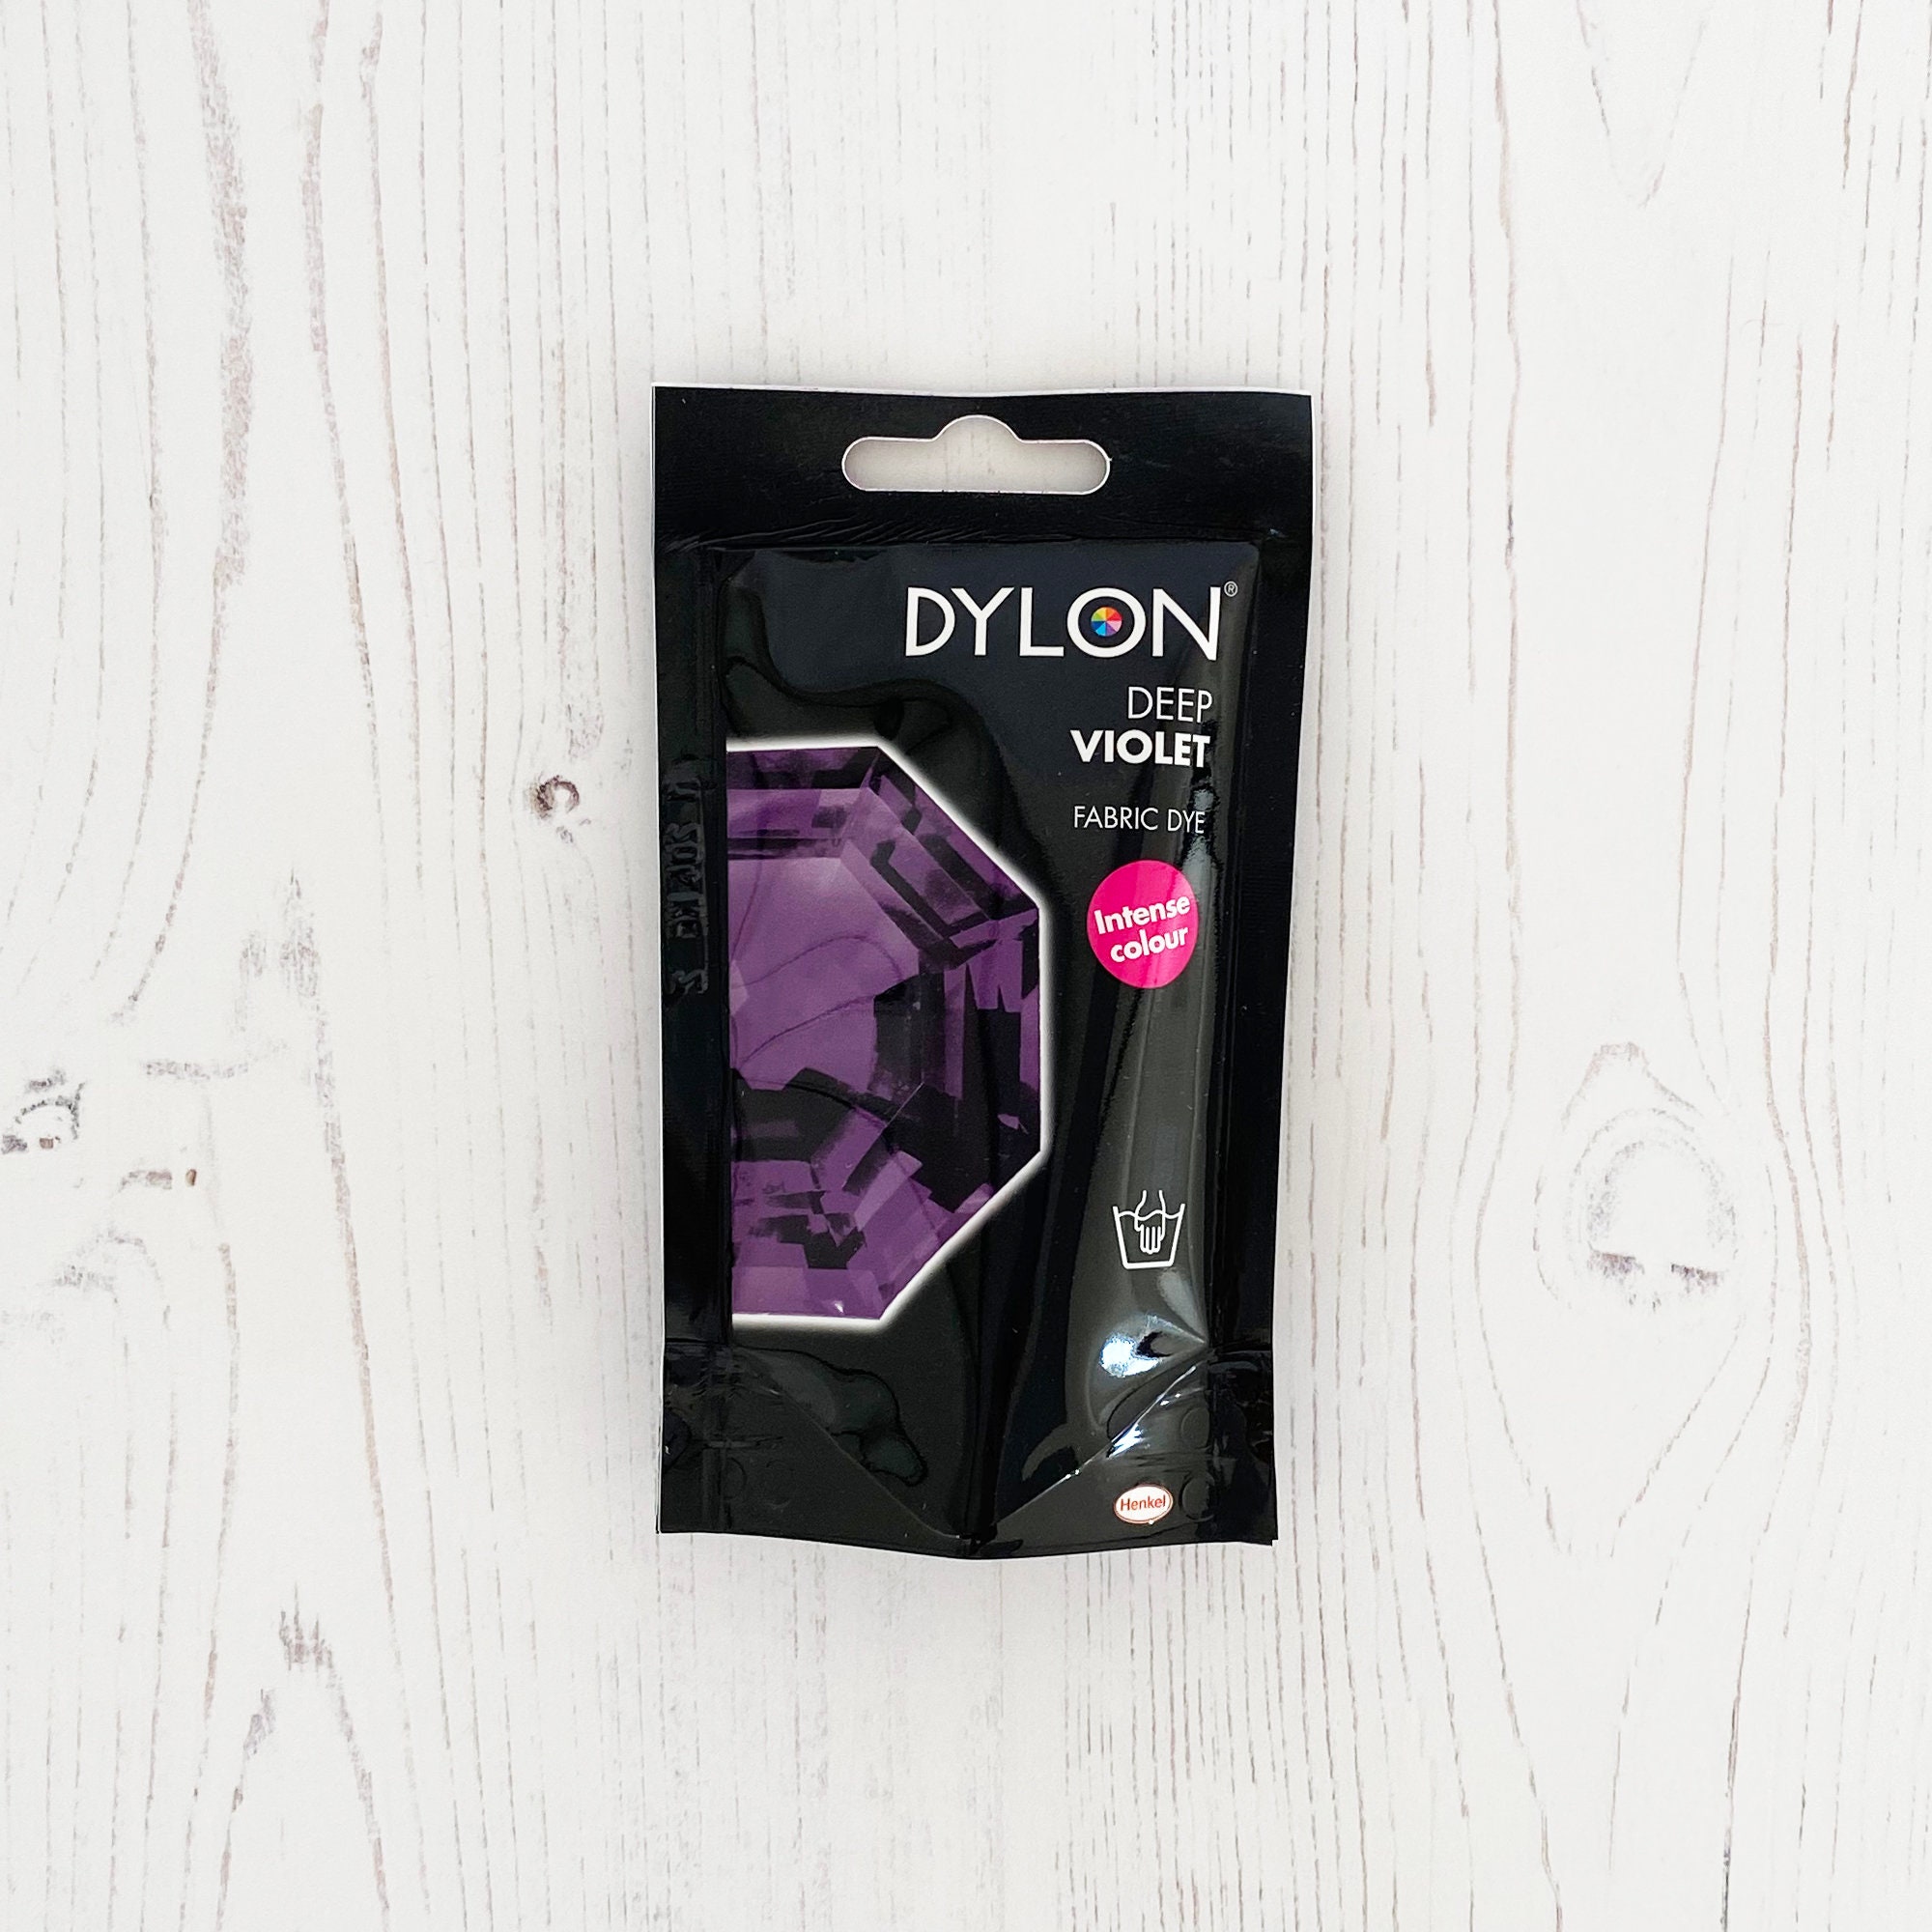 Dylon MULTI PURPOSE Fabric DYE 5g X 6 Packages 